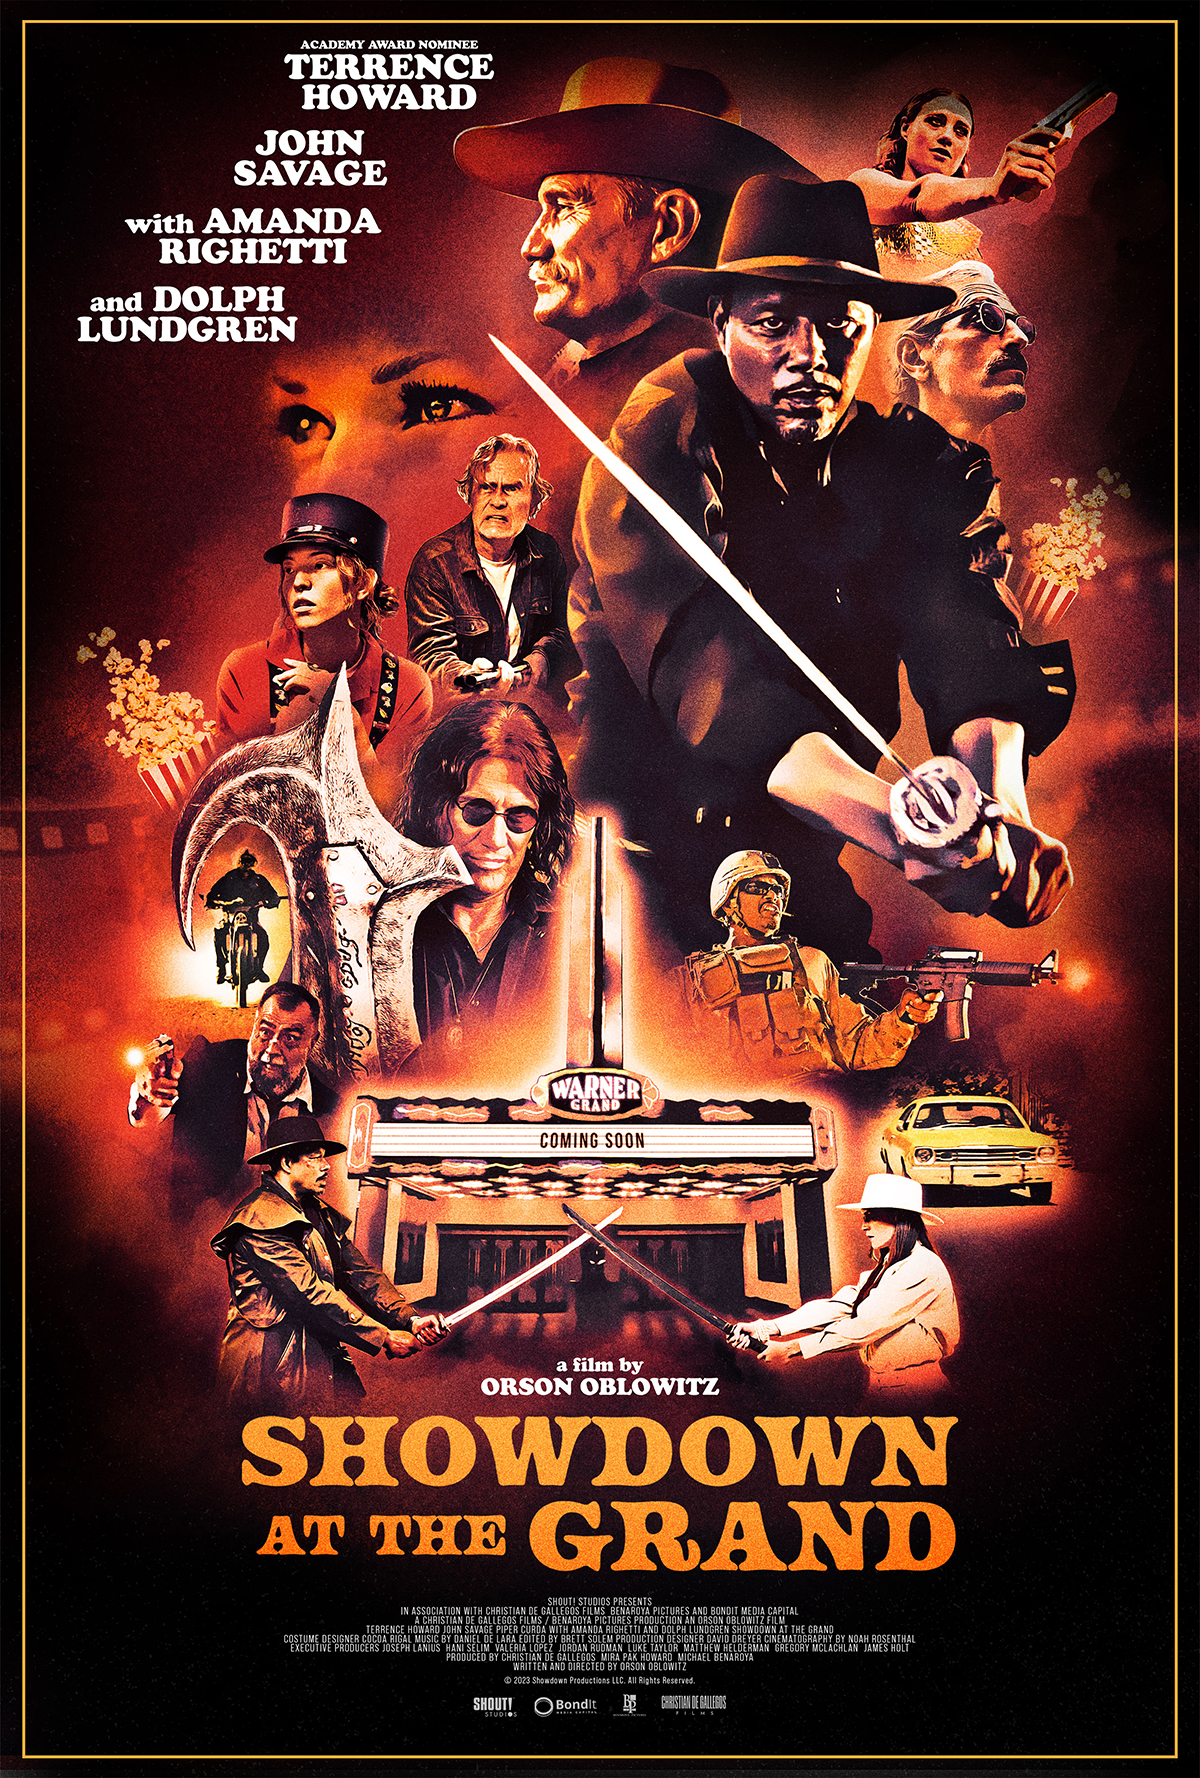 Written and Directed by Orson Oblowitz, 'Showdown at The Grand' is sure to resonate with fans of action cinema and cult film.